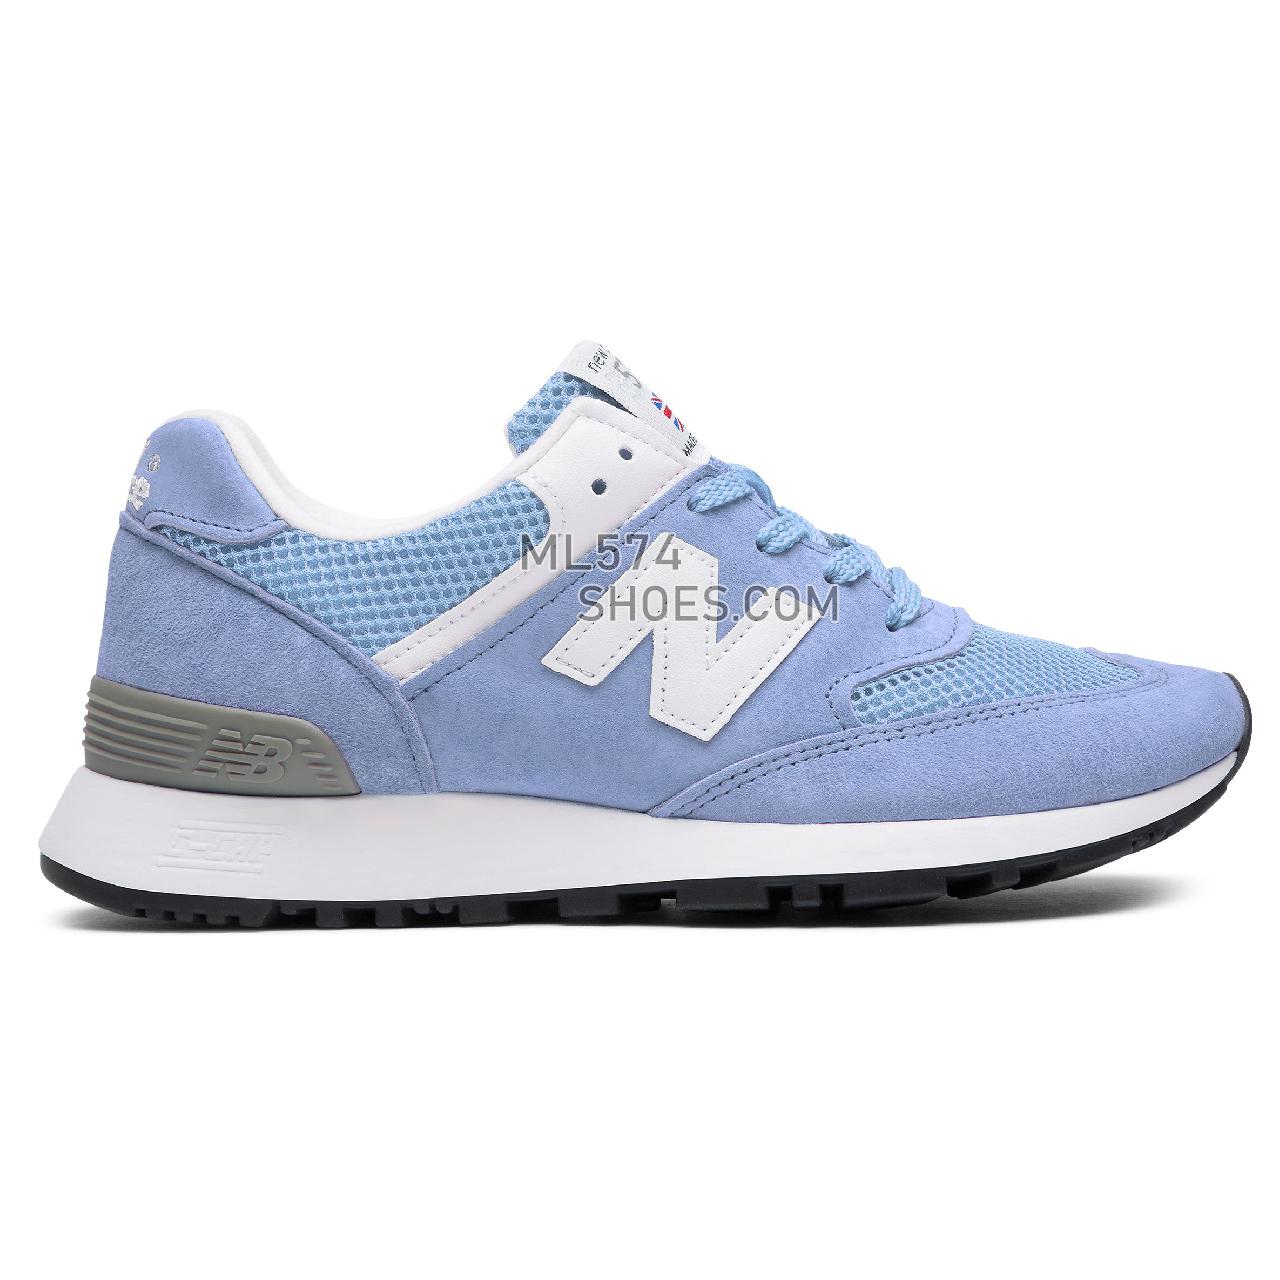 New Balance Made in UK 576 - Men's 576 Made in UK - Pale Blue with White - W576BBB